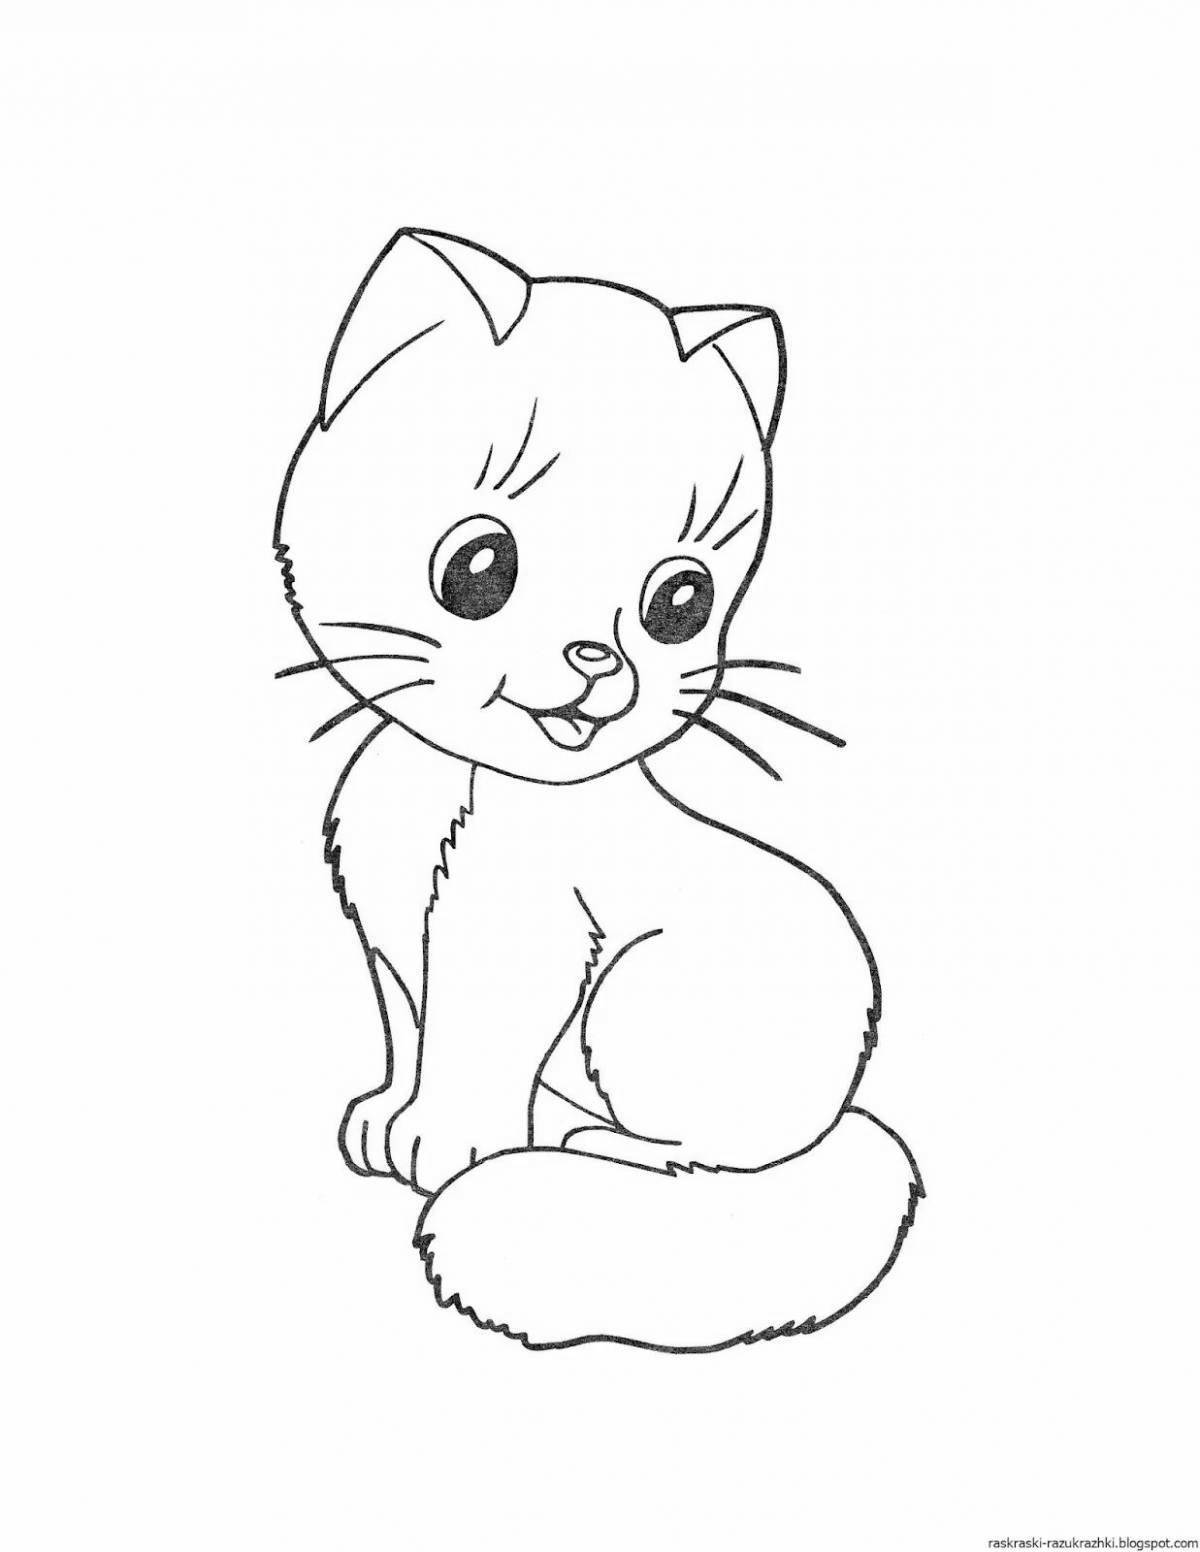 Colourful cat coloring book for children 2-3 years old